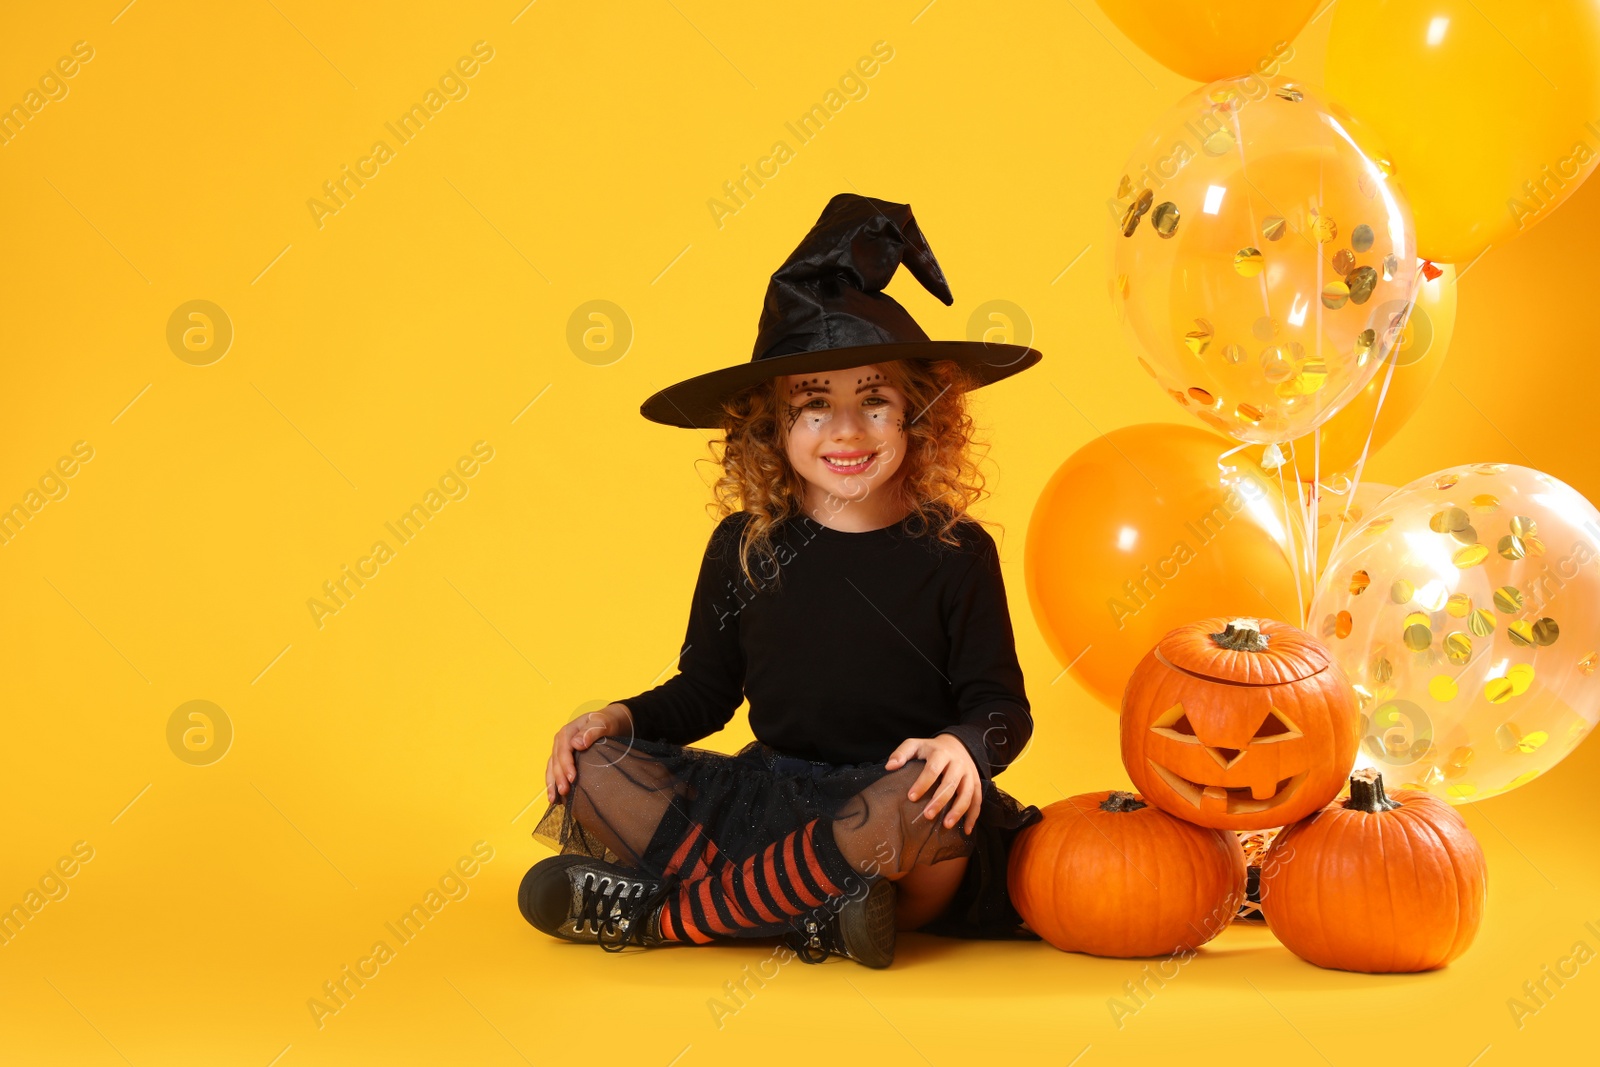 Photo of Cute little girl with pumpkins and balloons wearing Halloween costume on yellow background